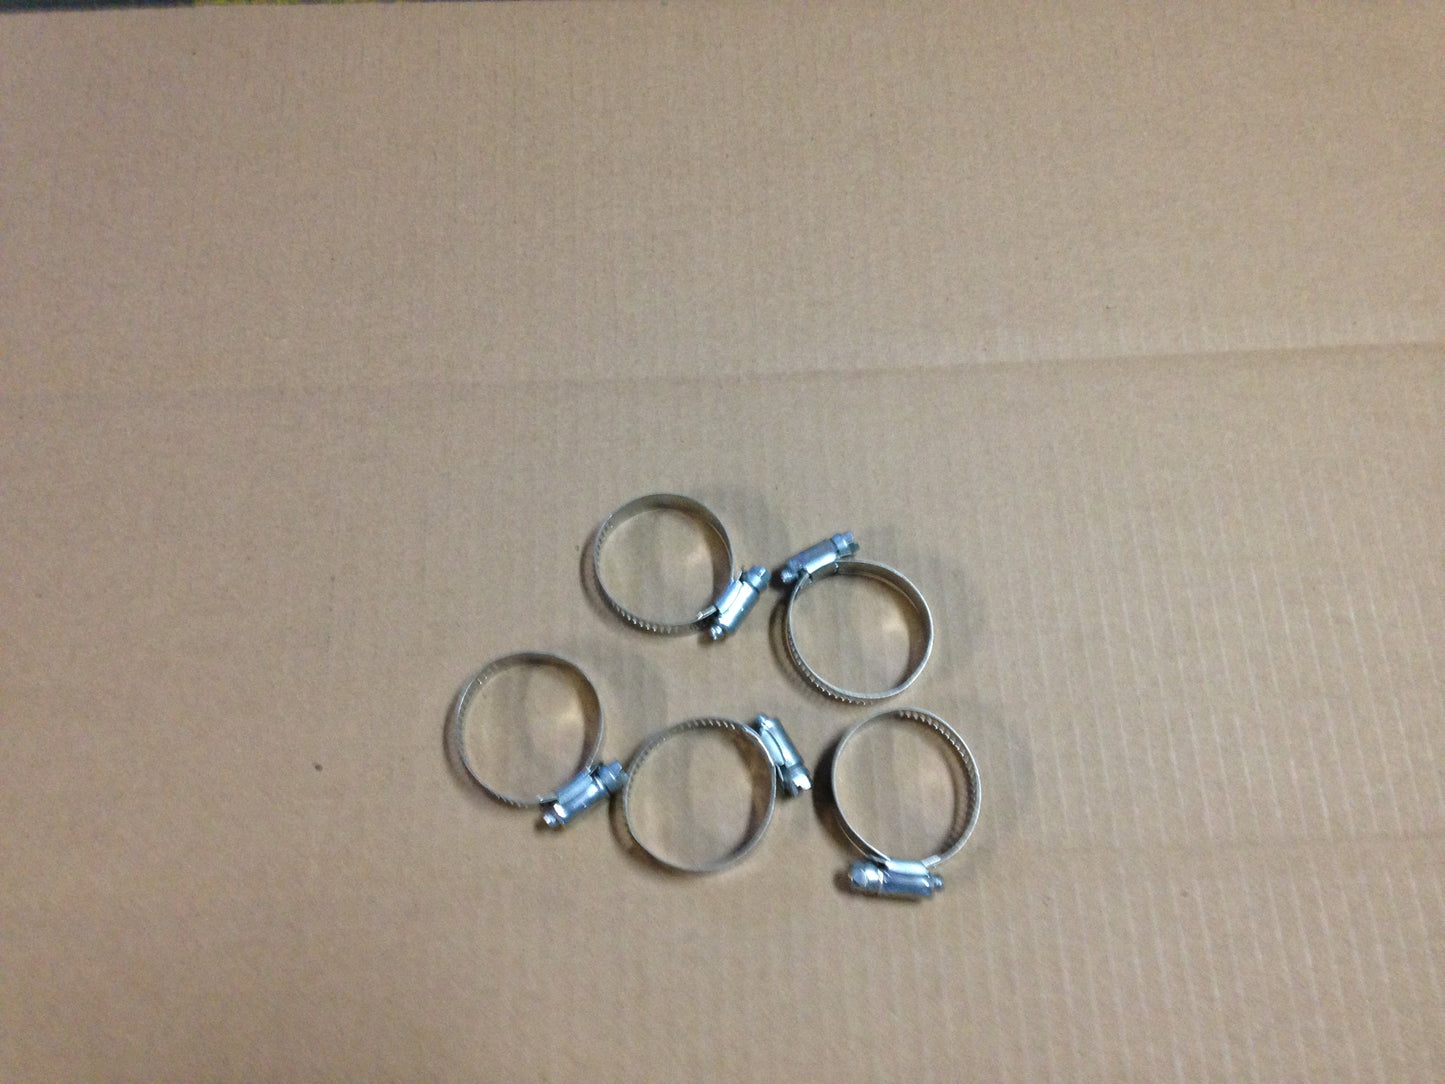 HOSE CLAMP # 24 , 1 1/16"-2",   SOLD AS 5 PER BOX